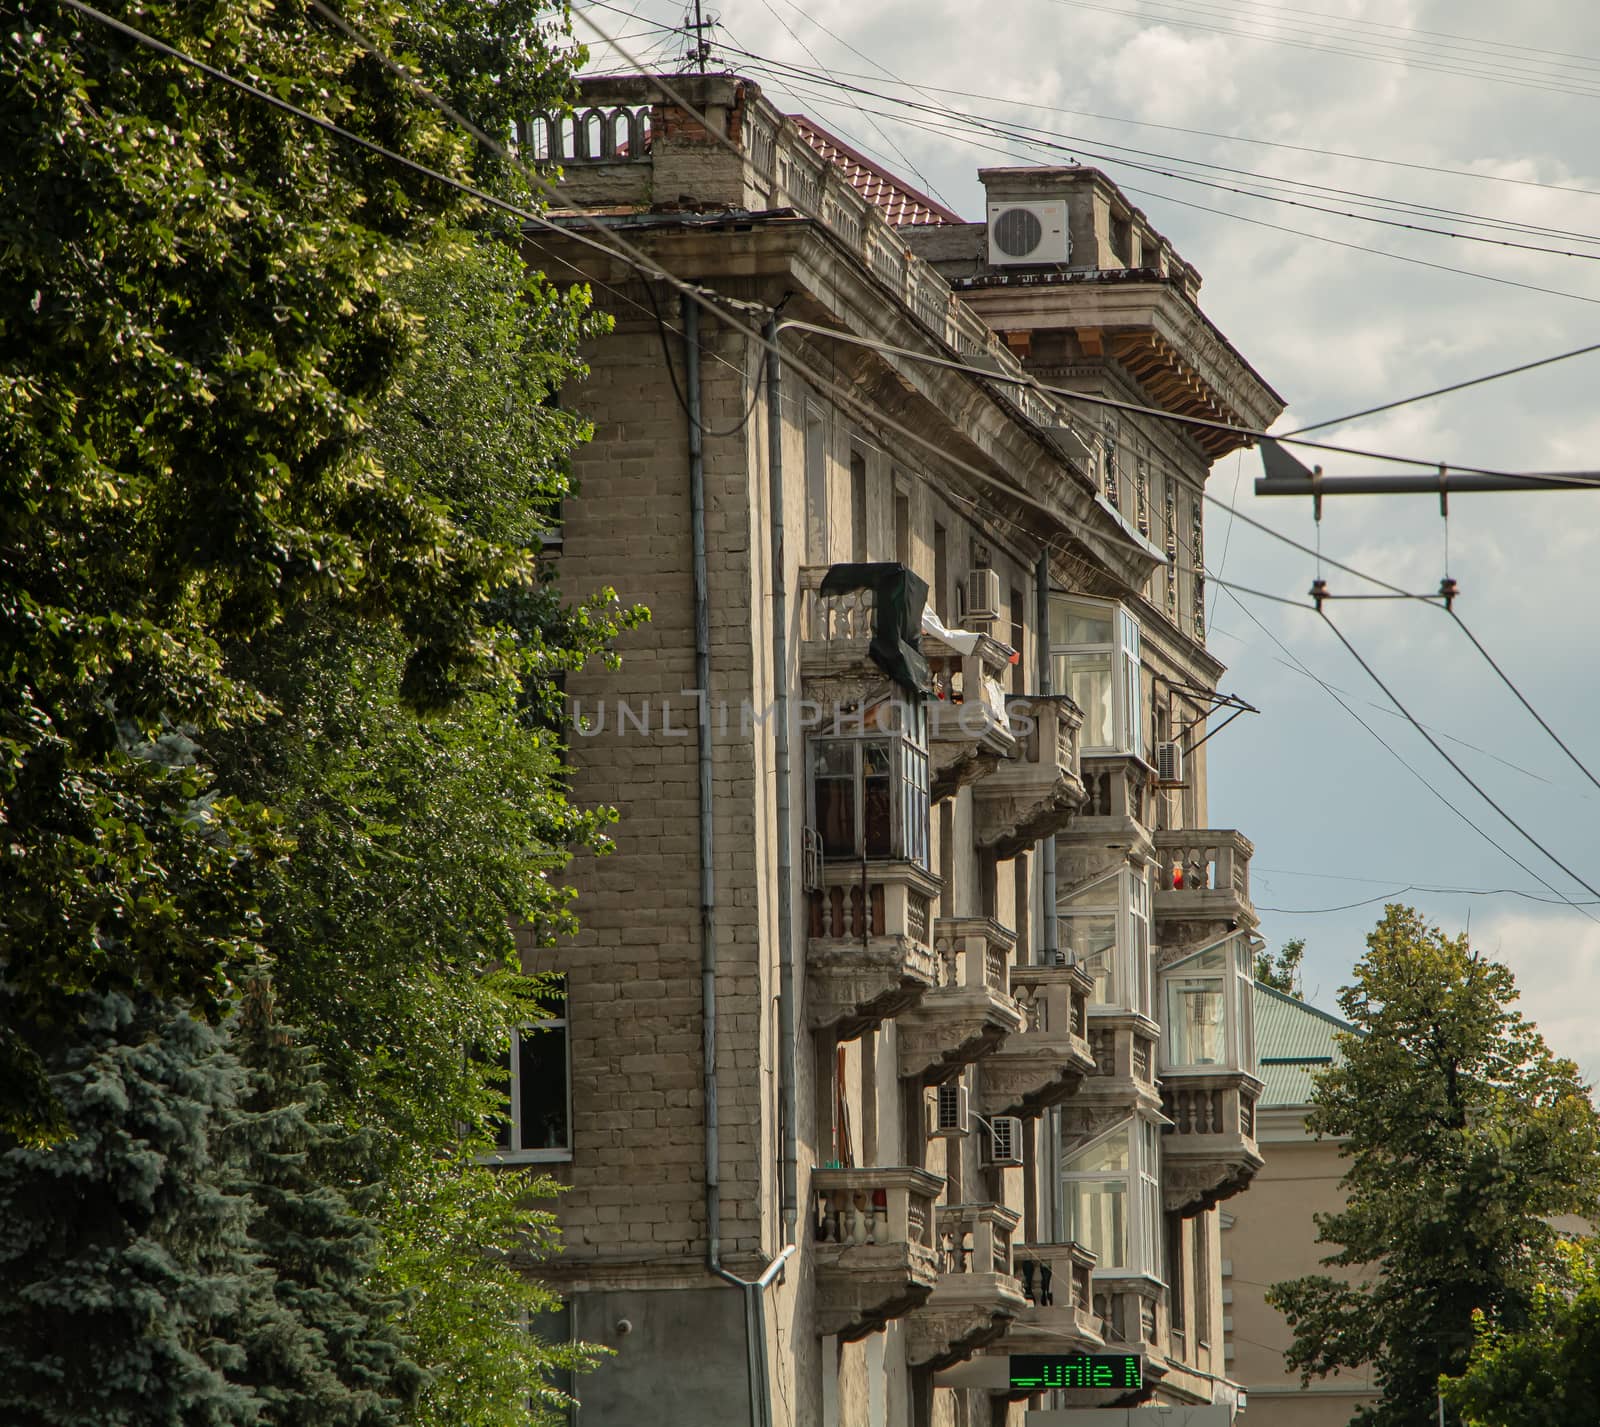 Chisinau, Moldova - July 14 2019. Building with old architecture in downtown.